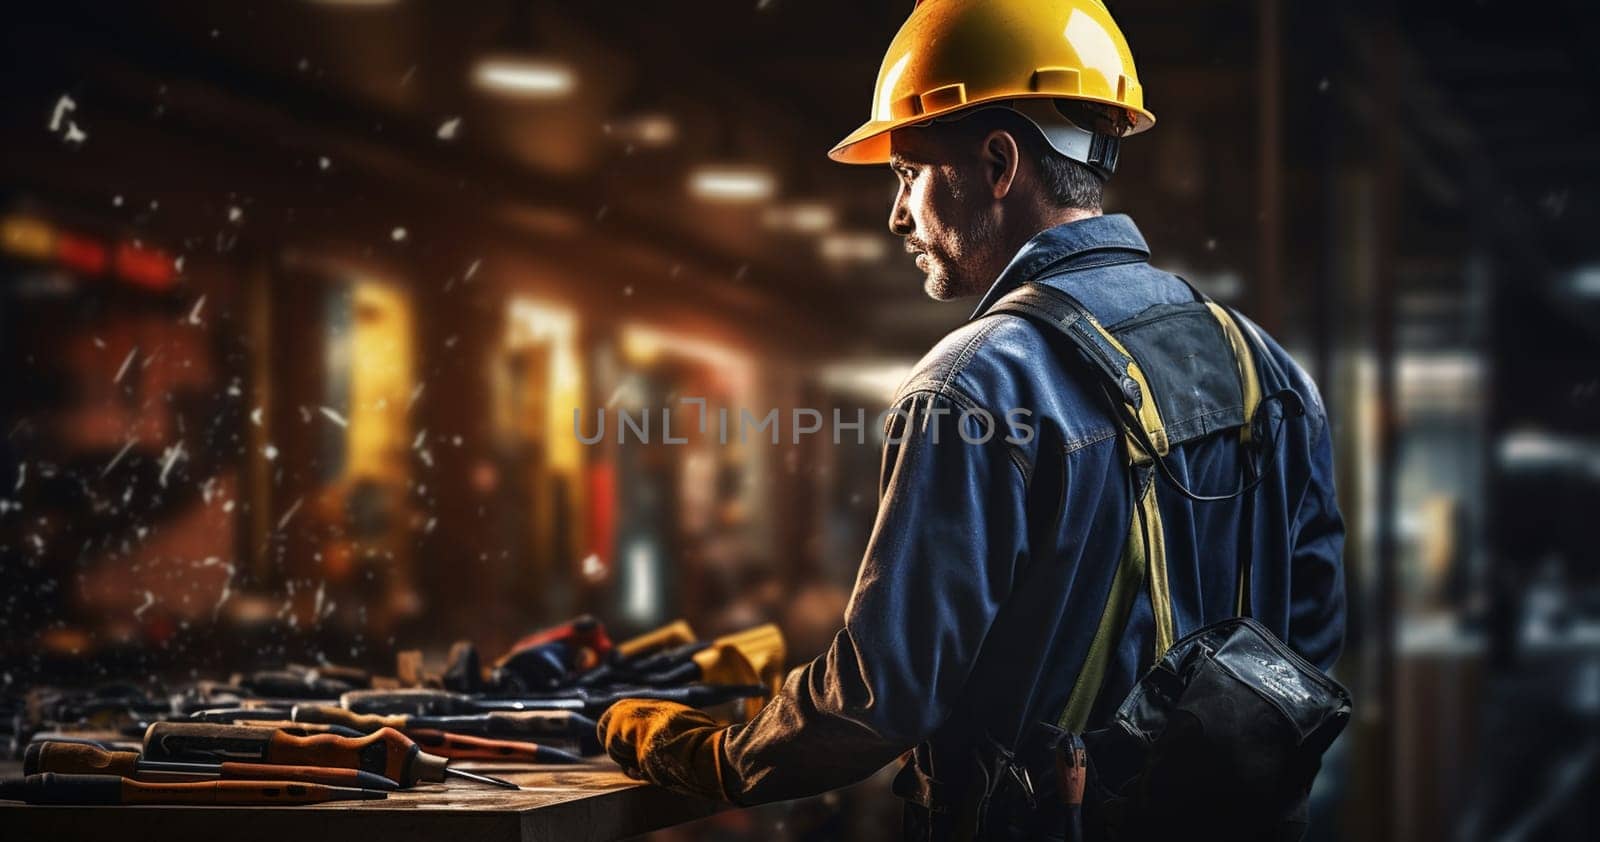 Heavy Industry Engineering Factory Interior with Industrial Worker Using Angle Grinder and Cutting a Metal Tube. Contractor in Safety Uniform and Hard Hat Manufacturing Metal Structures. by Andelov13